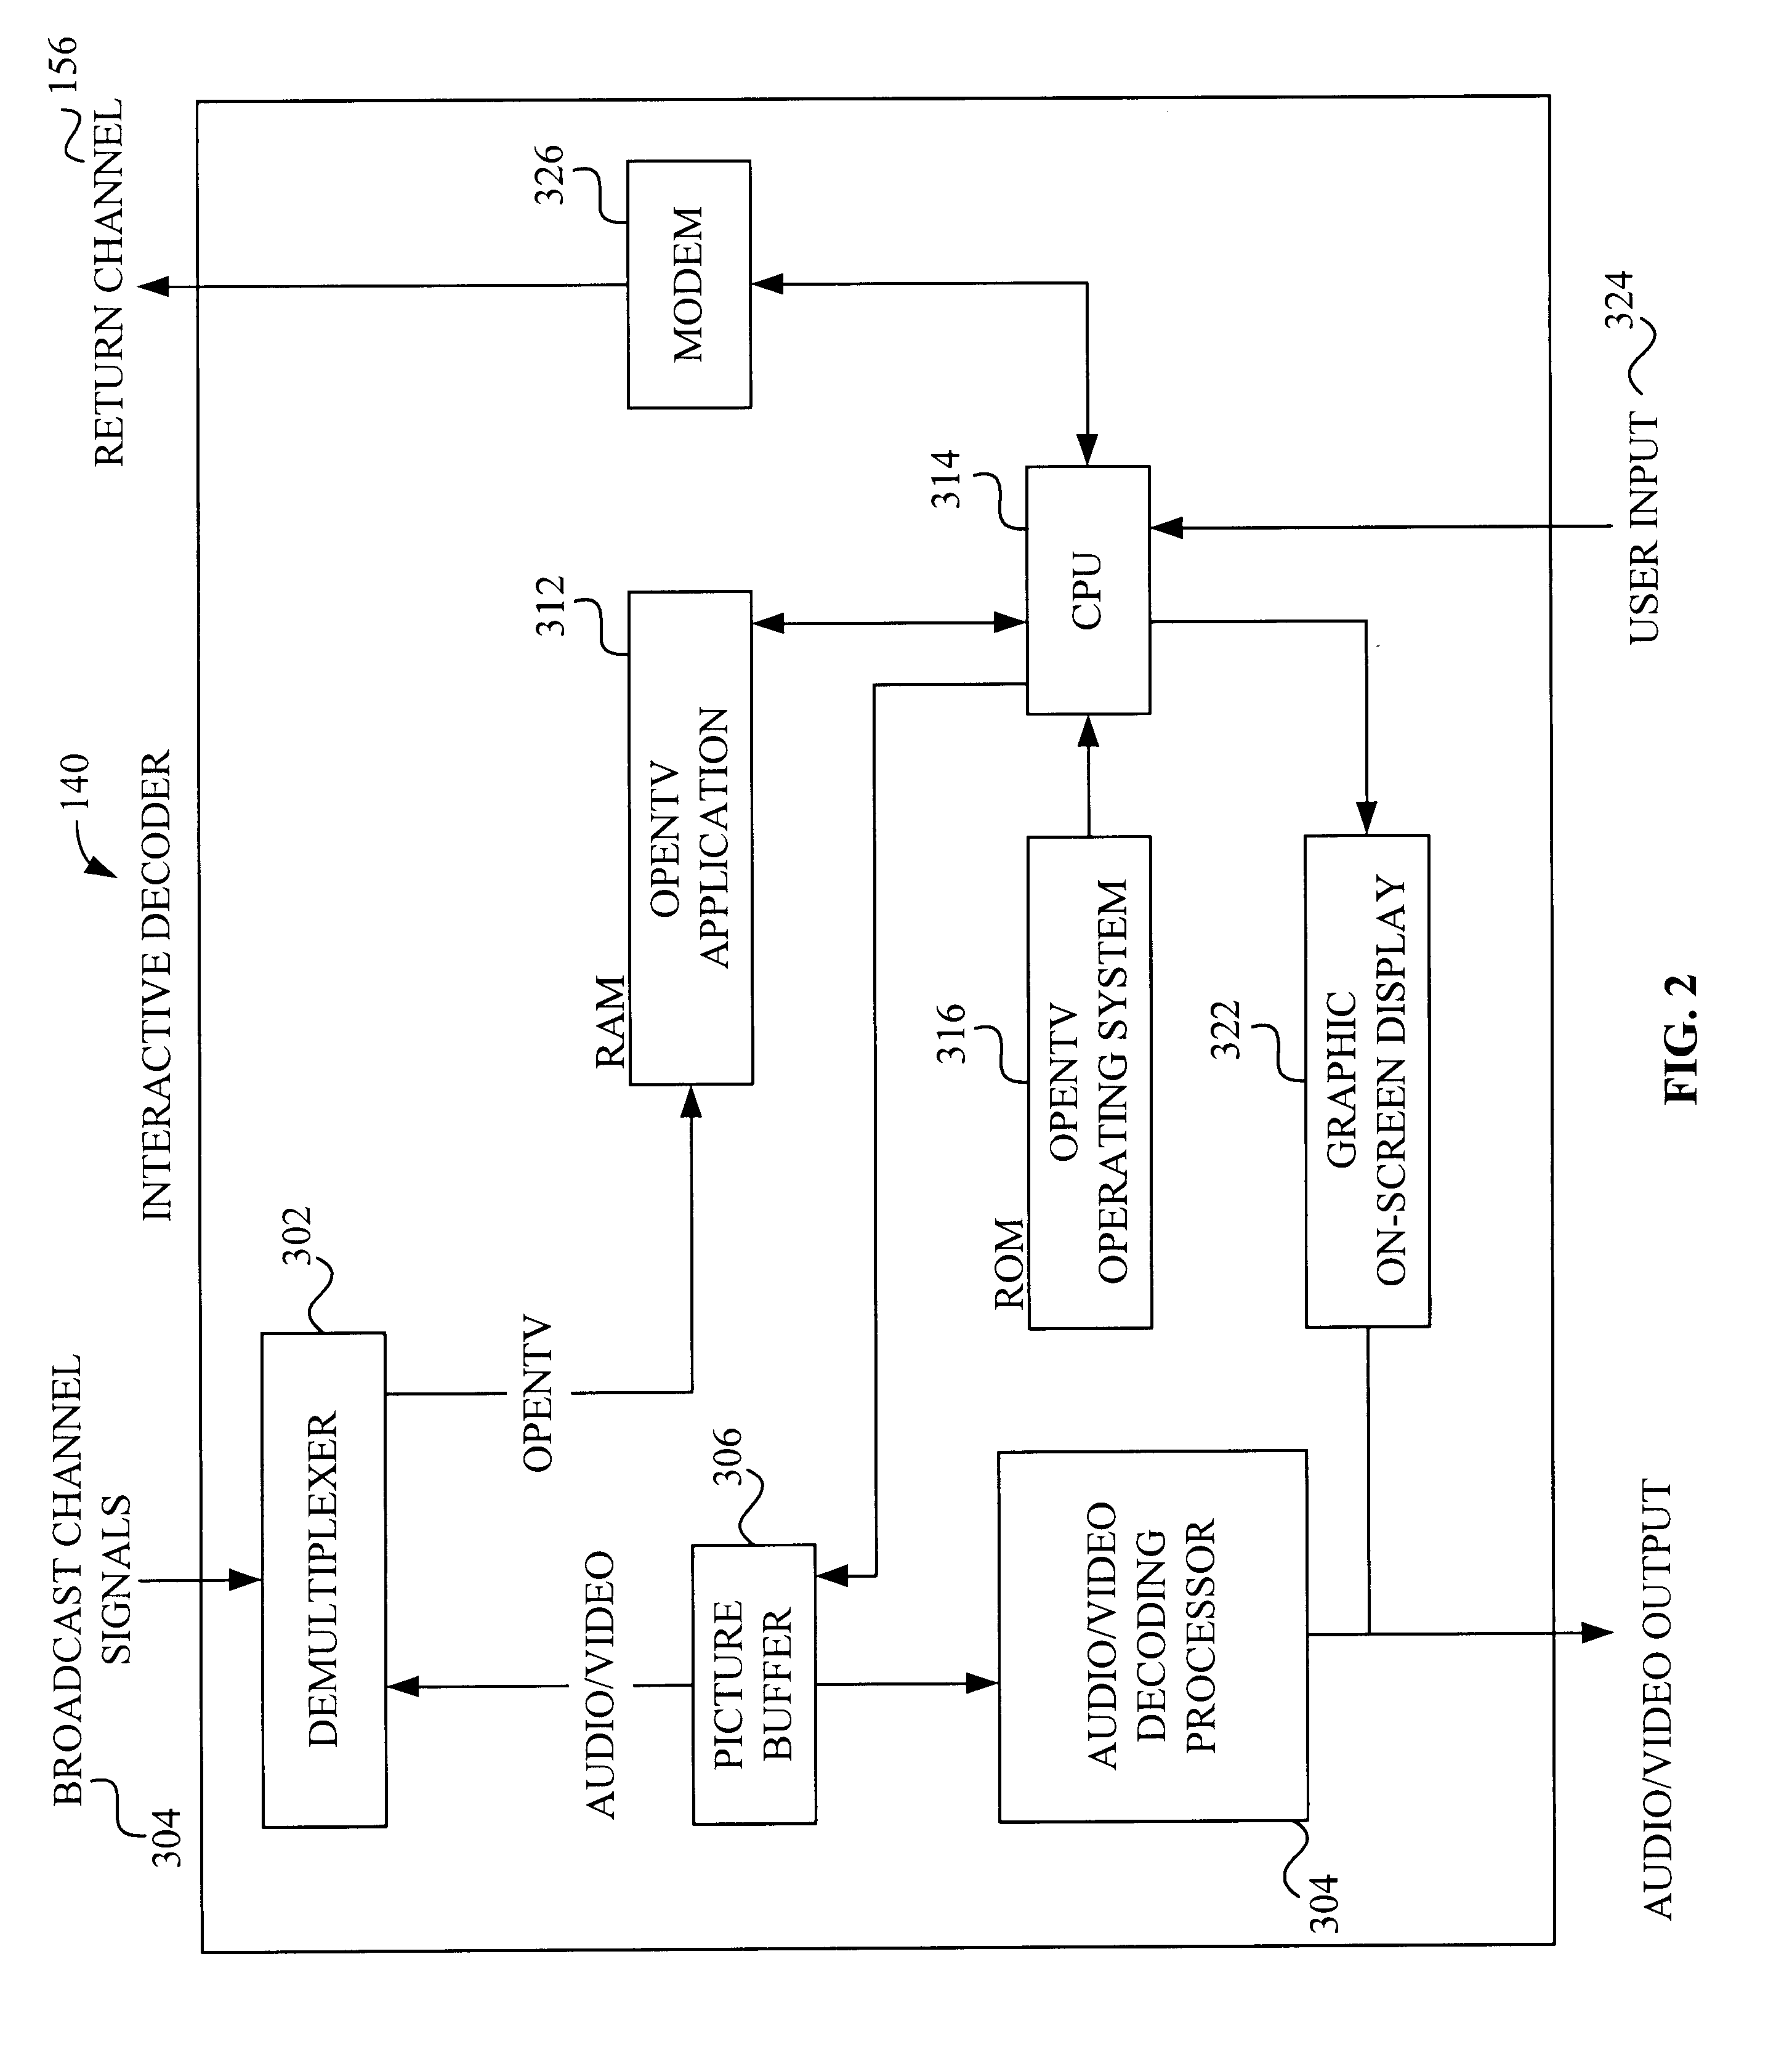 Interactive television system and method for simultaneous transmission and rendering of multiple encoded video streams